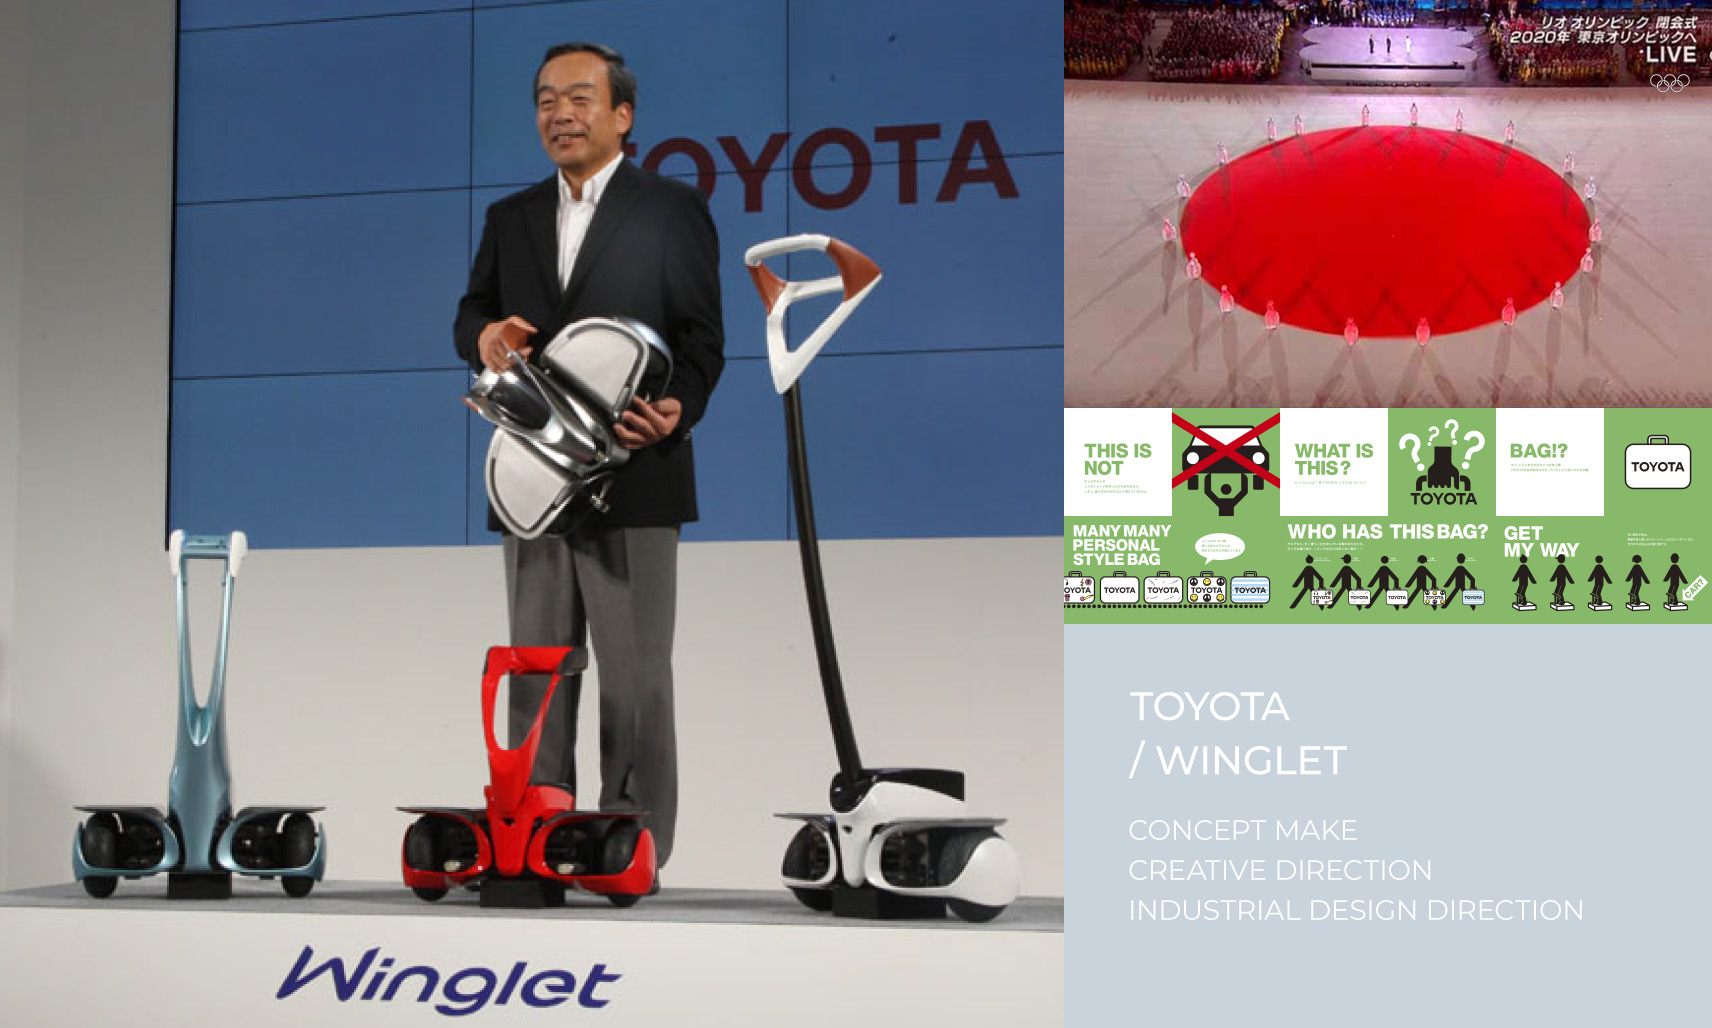 TOYOTA / WINGLET - CONCEPT MAKE CREATIVE DIRECTION INDUSTRIAL DESIGN DIRECTION